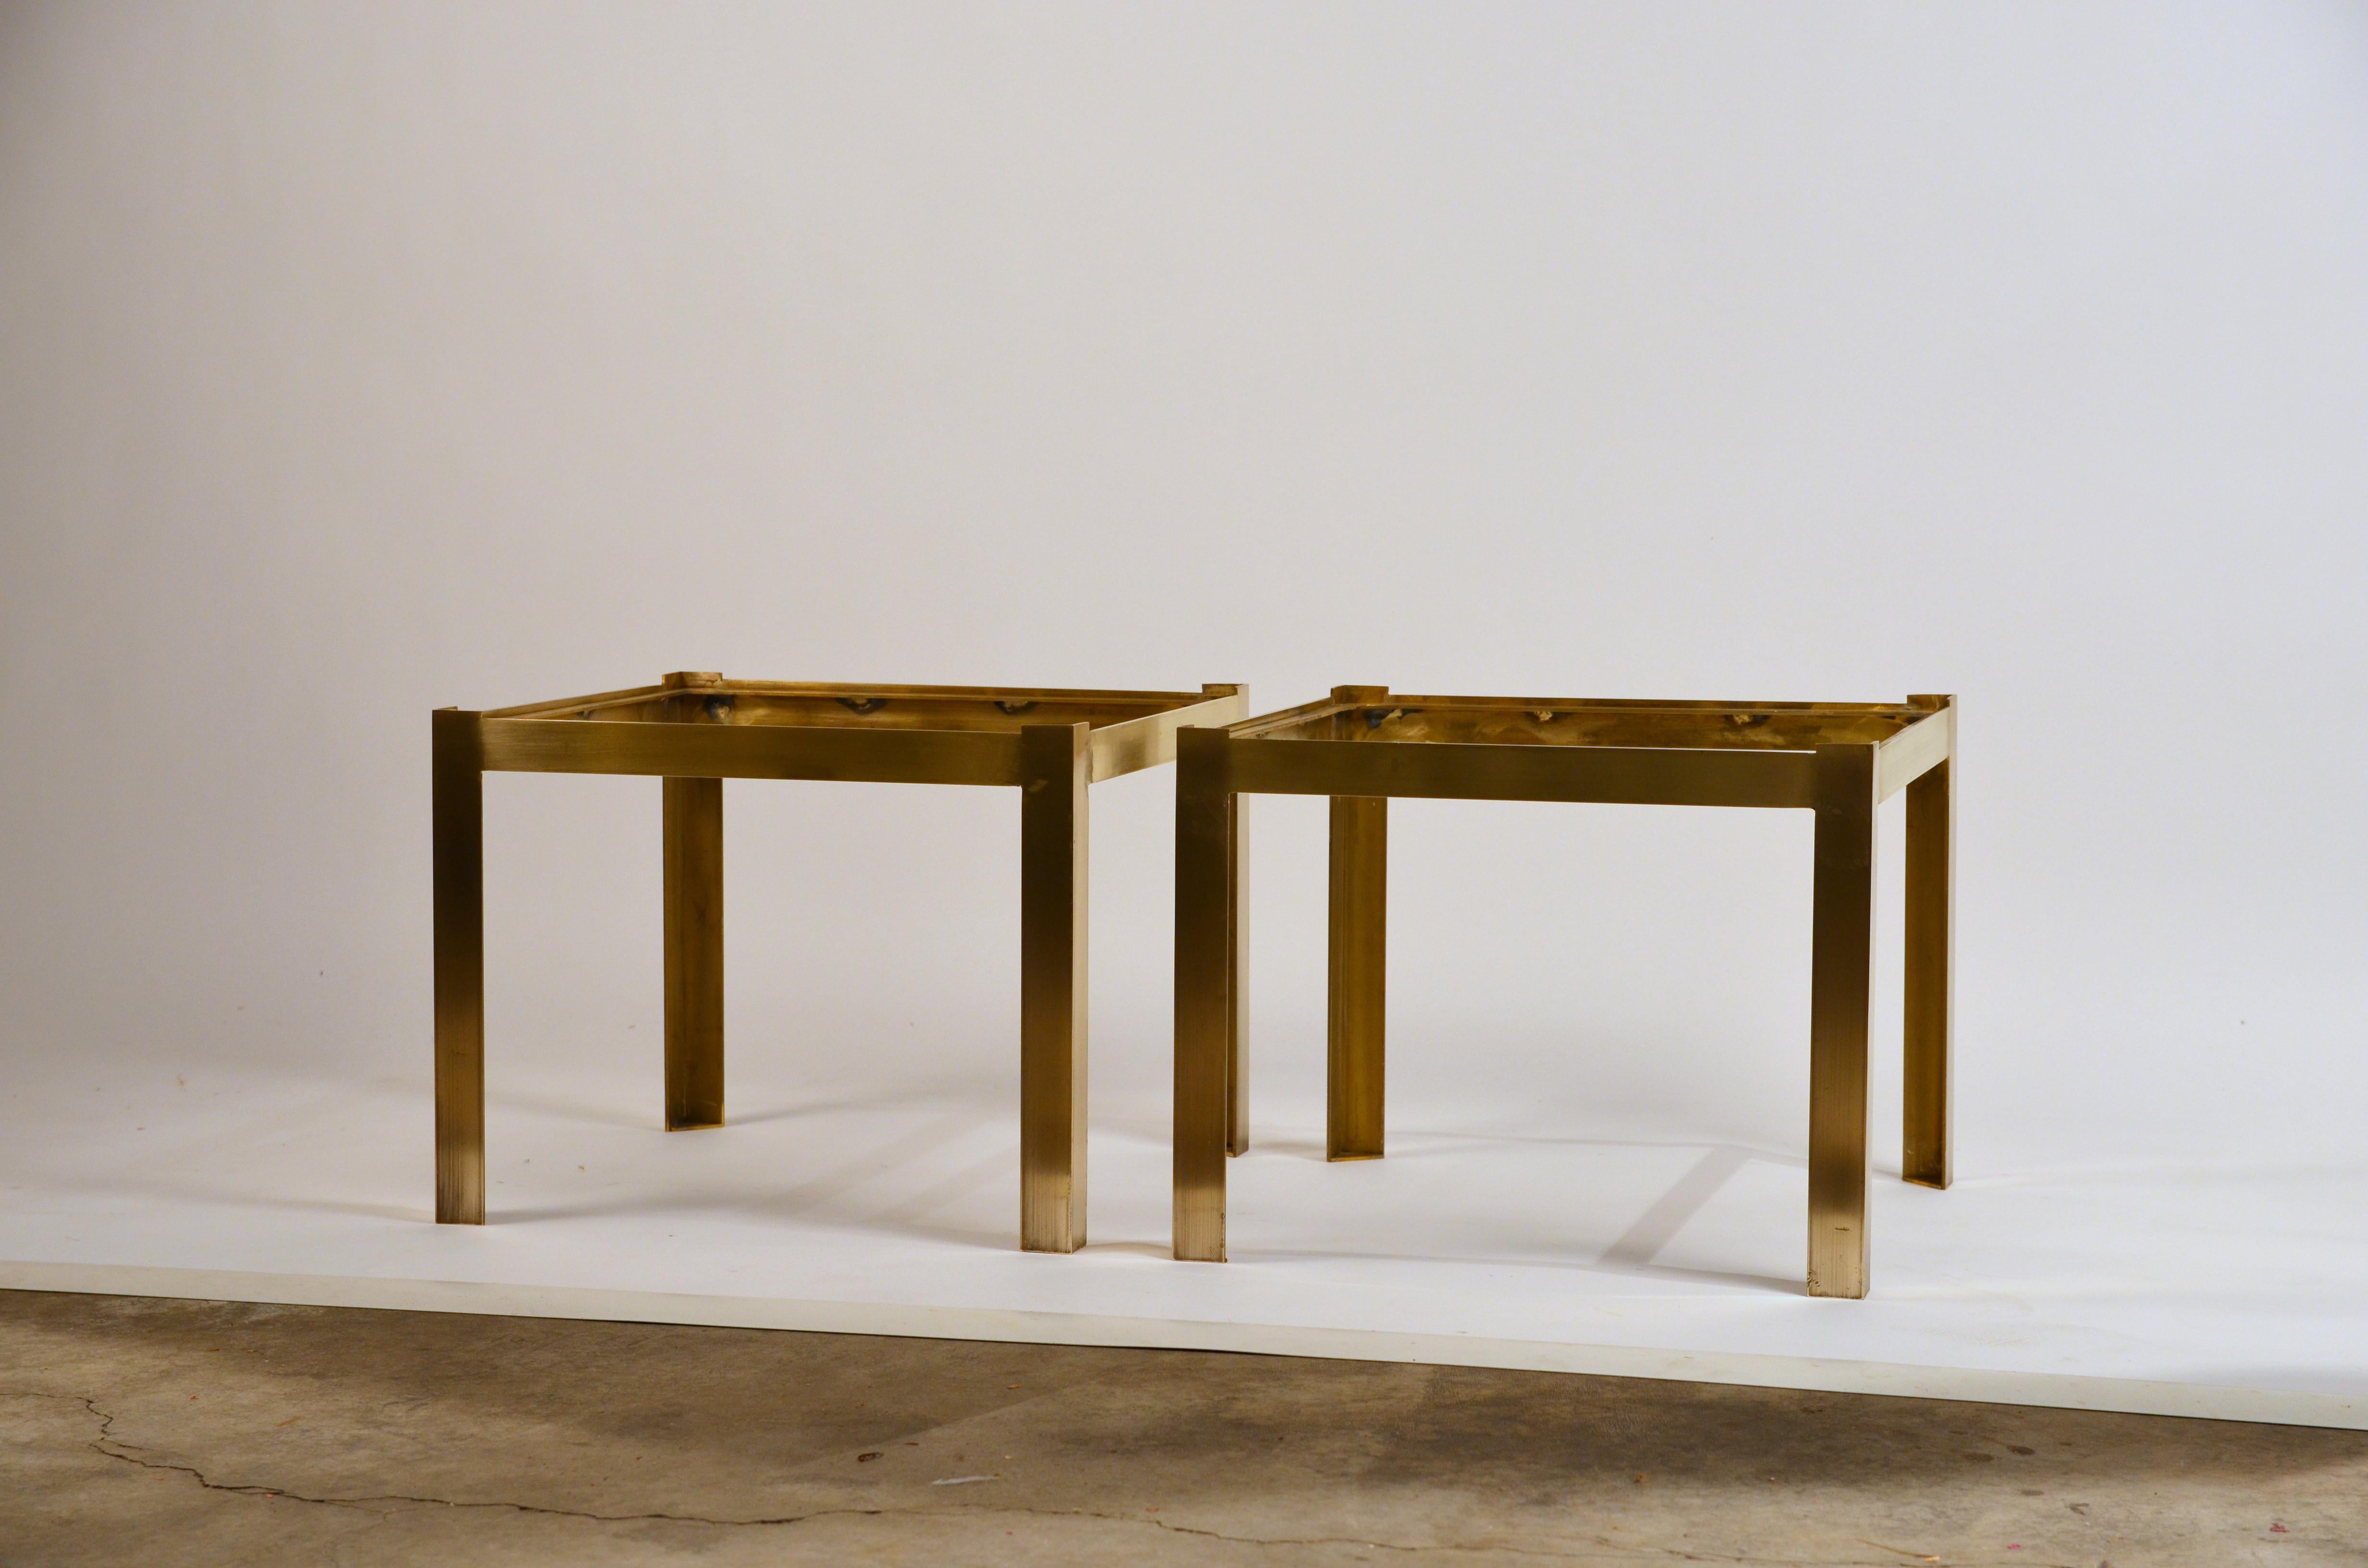 Pair of 'Caisson' Lacquer and Patinated Brass Side Tables by Design Frères In New Condition For Sale In Los Angeles, CA